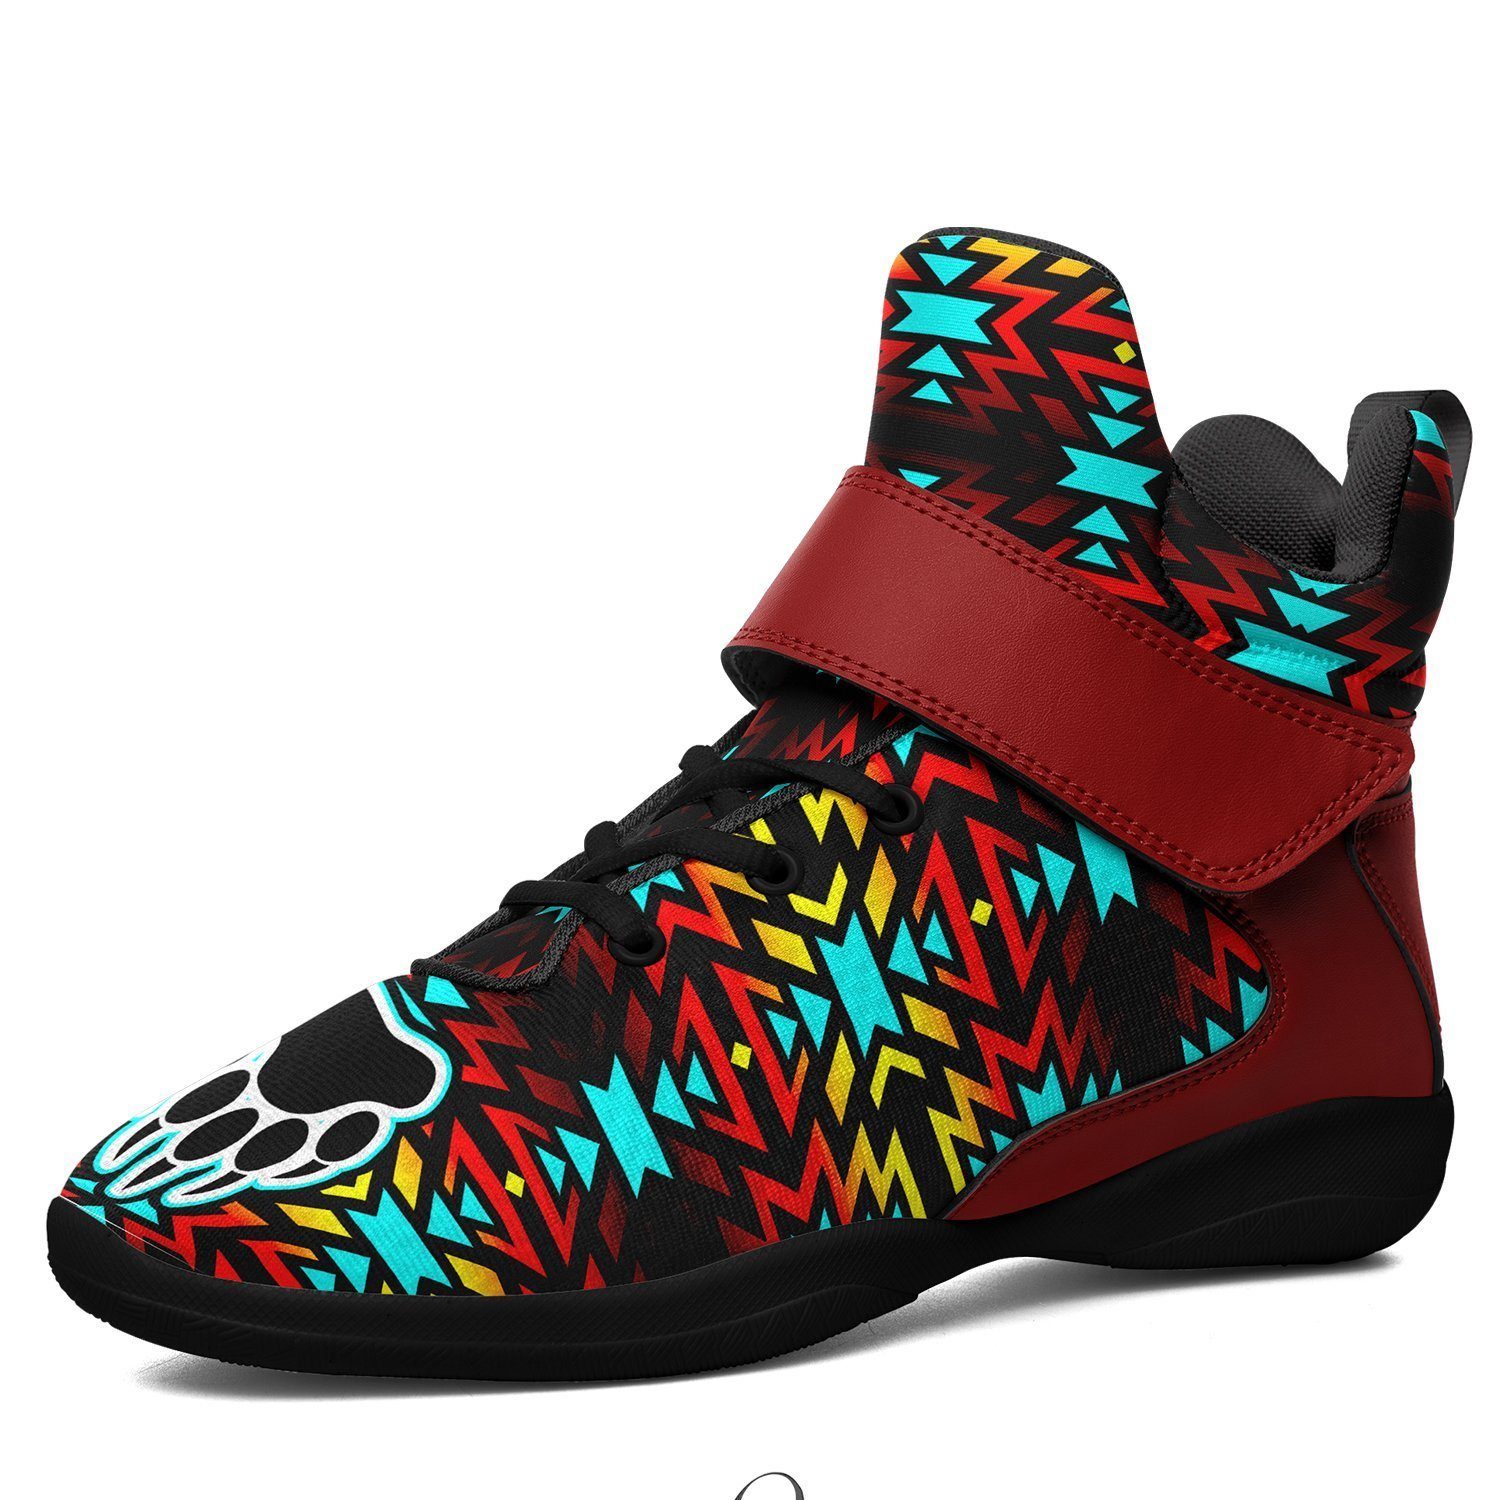 Fire Colors and Turquoise Bearpaw Ipottaa Basketball / Sport High Top Shoes - Black Sole 49 Dzine US Men 7 / EUR 40 Black Sole with Dark Red Strap 